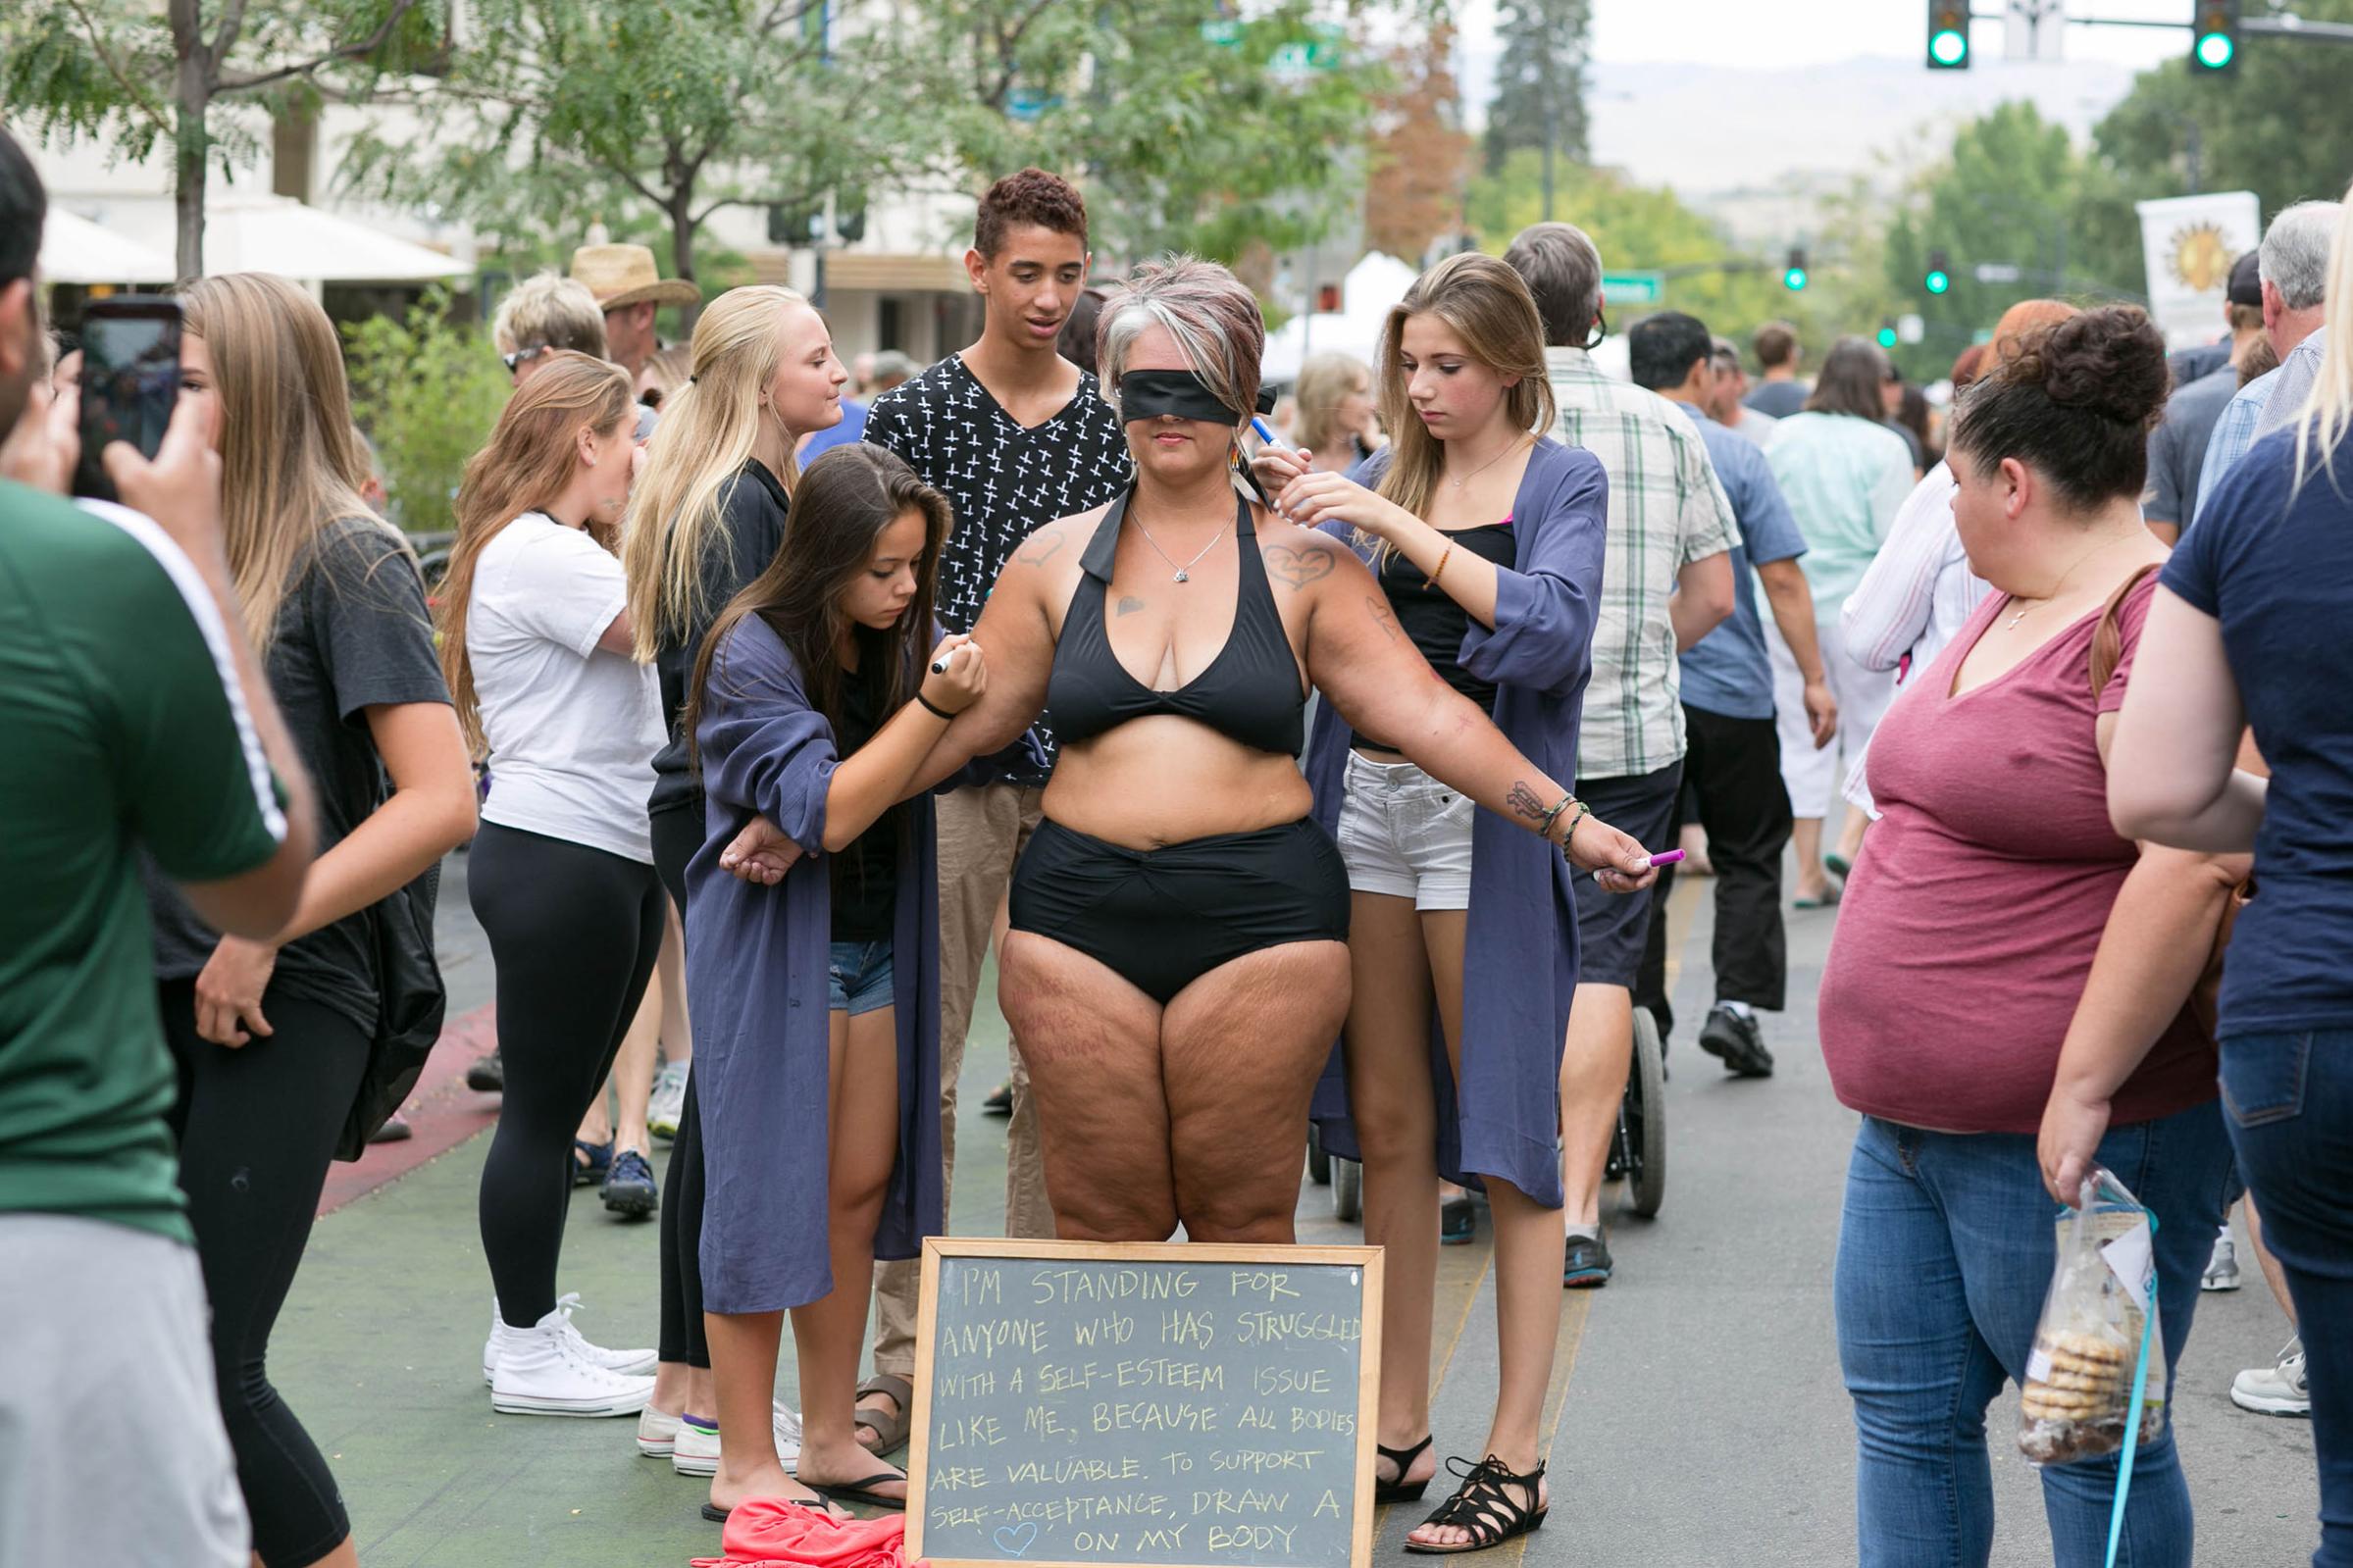 Body image activist Amy Pence-Brown participating in her "self-love performance art piece" in Capital City Public Market in Boise, Idaho on Aug. 29, 2015